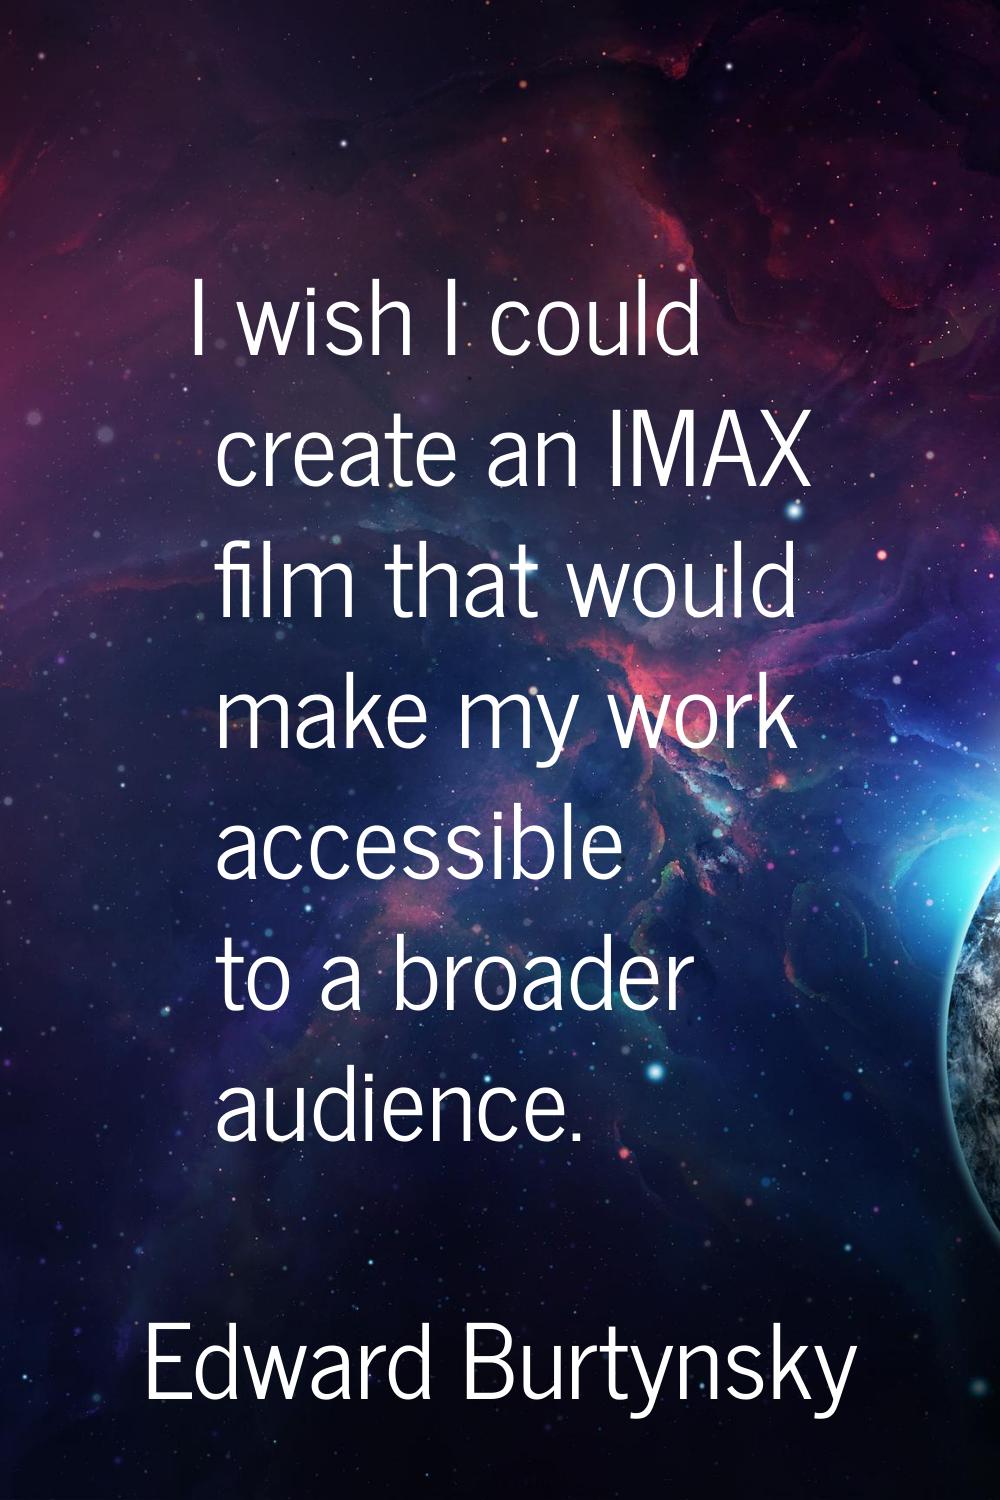 I wish I could create an IMAX film that would make my work accessible to a broader audience.